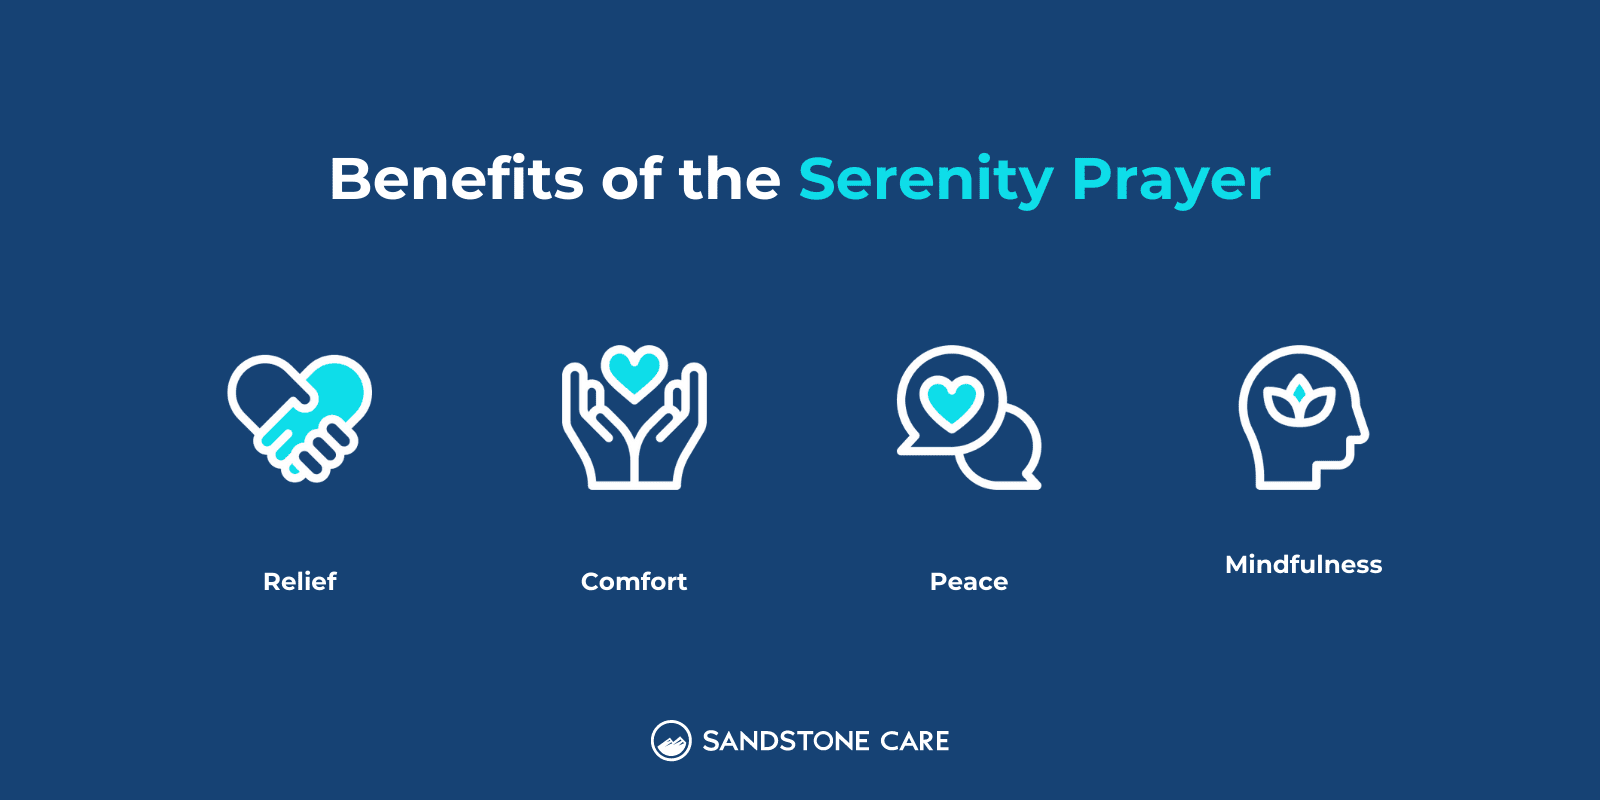 Benefits of serenity prayer and relevant icons of each 4 benefits of the serenity prayer: Relief, Comfort, Peace, Mindfulness